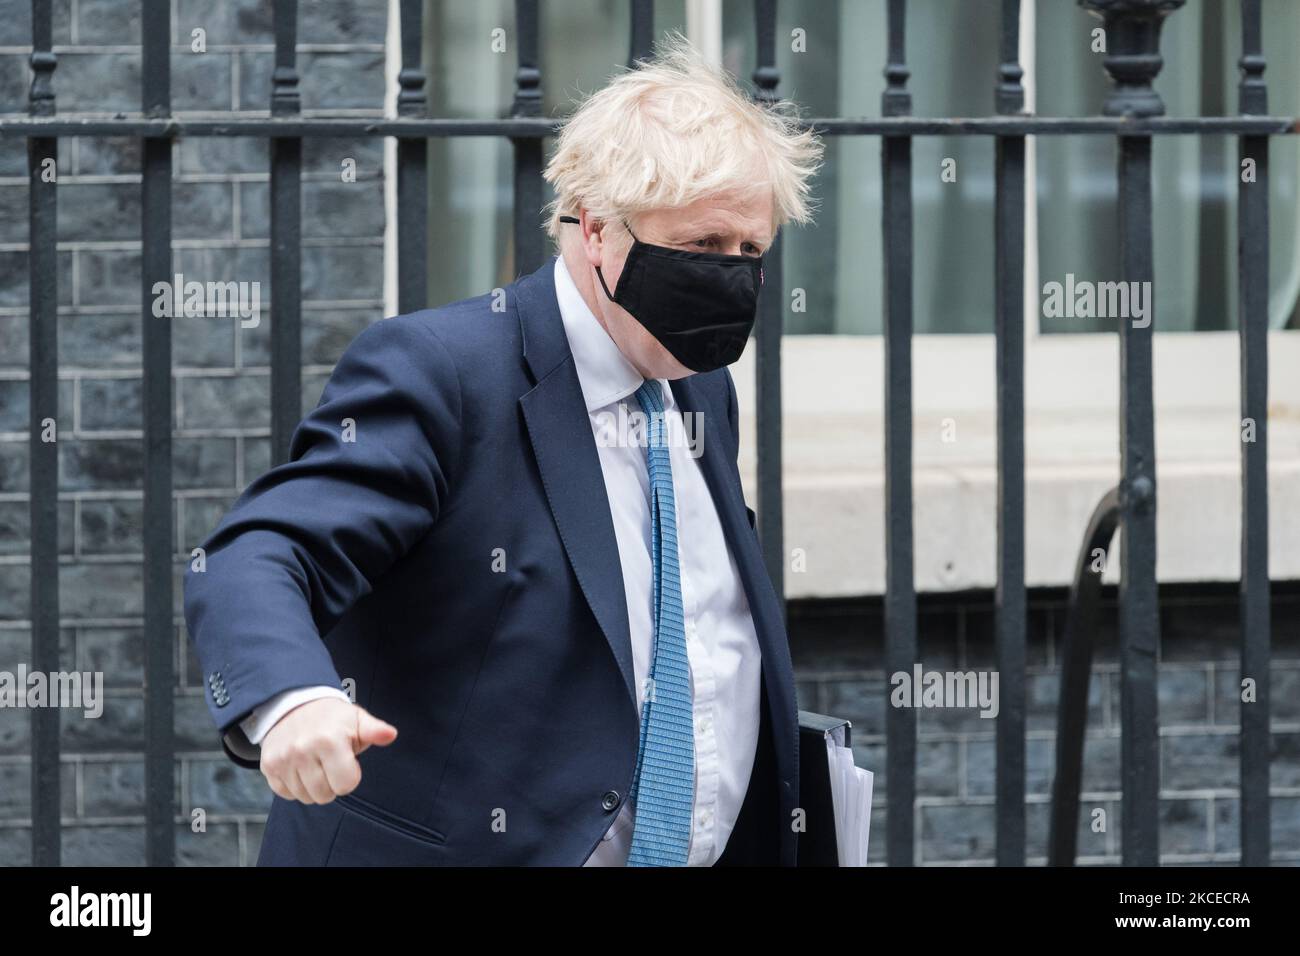 LONDON, UNITED KINGDOM - MAY 12, 2021: British Prime Minister Boris Johnson leaves 10 Downing Street for the House of Commons to give MPs an update on Covid-19 and lifting restrictions in England ahead of the second day Queen's Speech debate, on 12 May, 2021 in London, England. (Photo by WIktor Szymanowicz/NurPhoto) Stock Photo